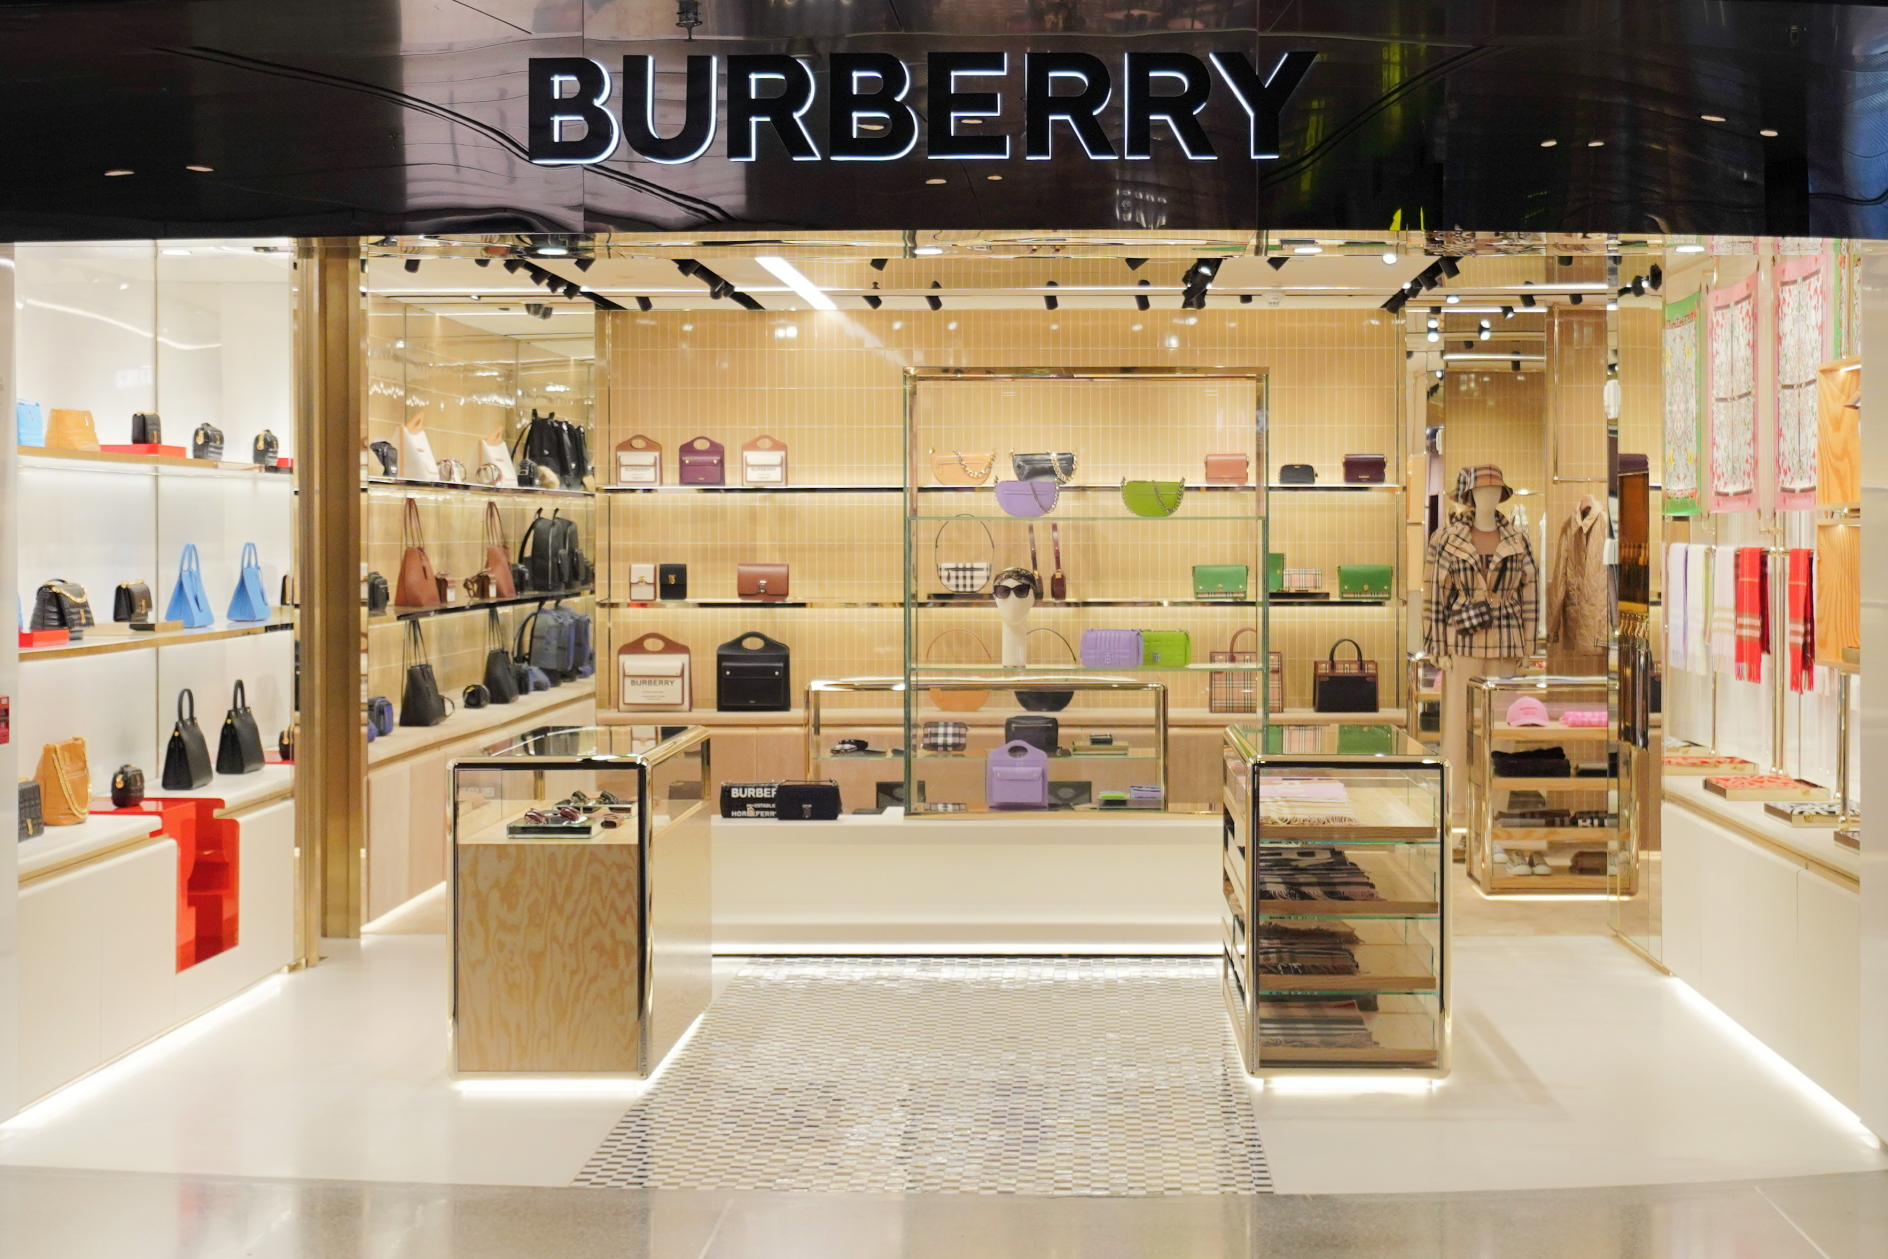 Burberry's Qatar Duty Free (QDF) outlet at Hamad International Airport (HIA). Click to enlarge.